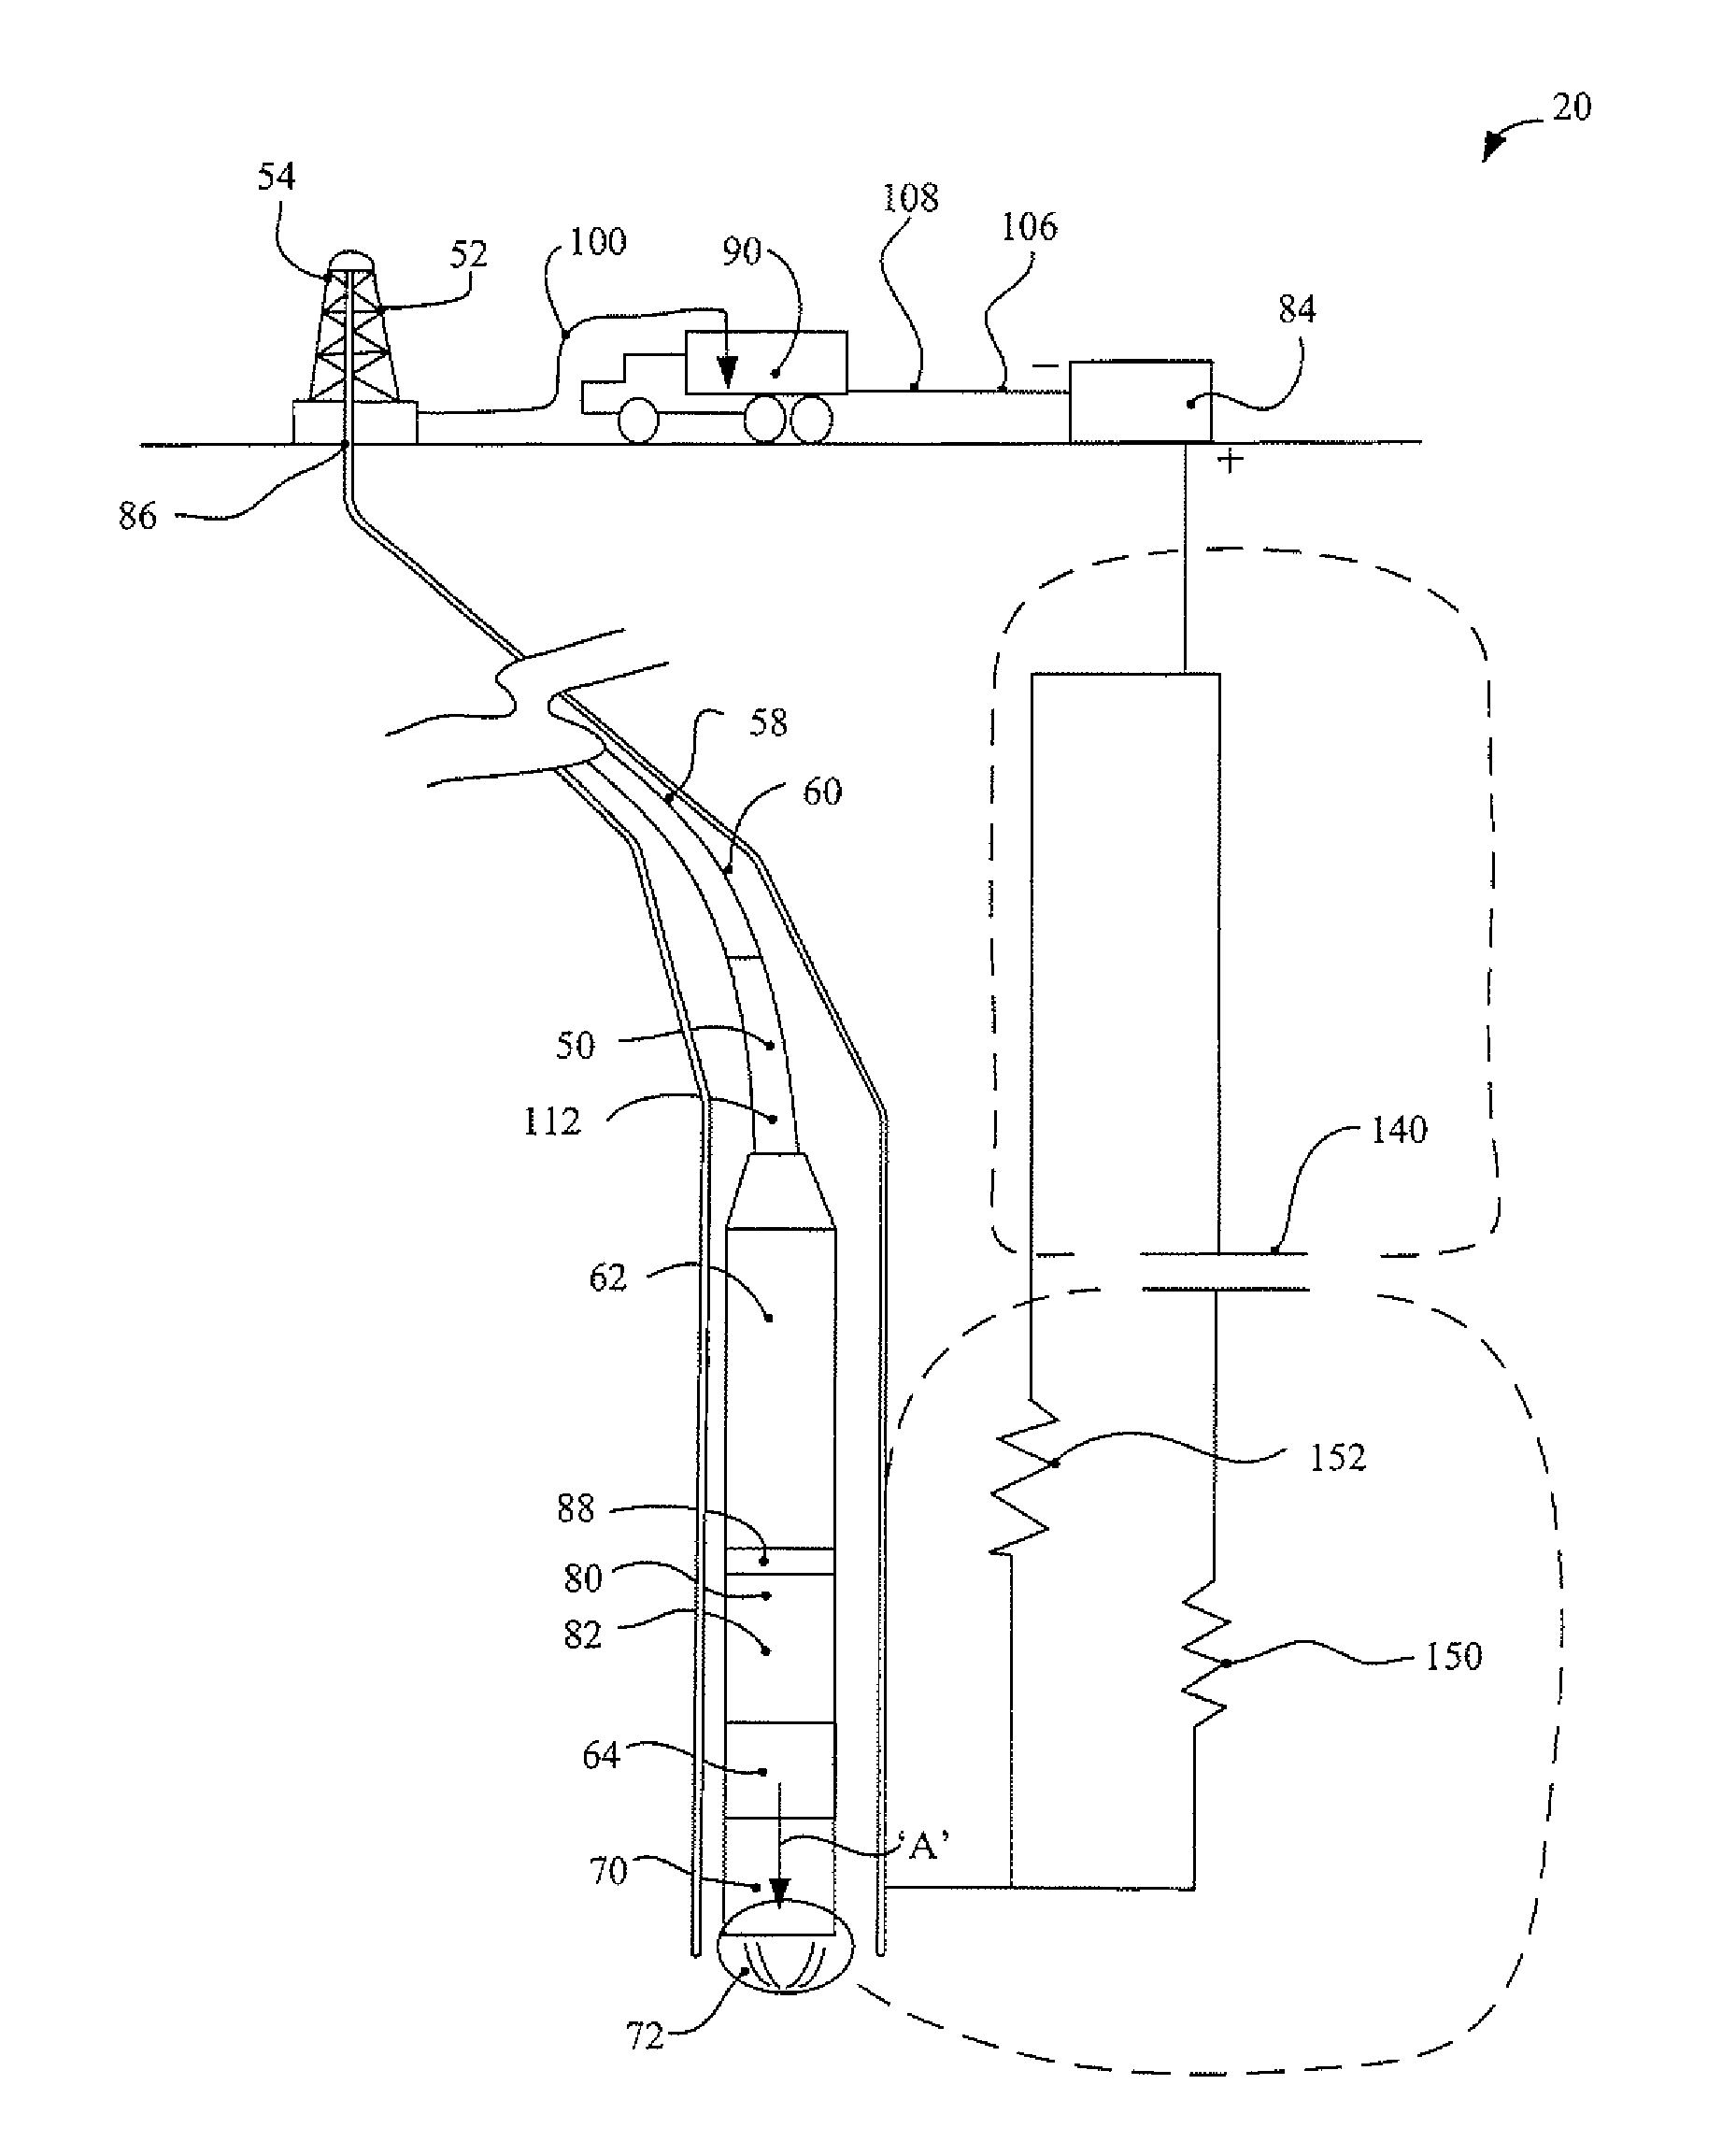 Downhole telemetry apparatus and method